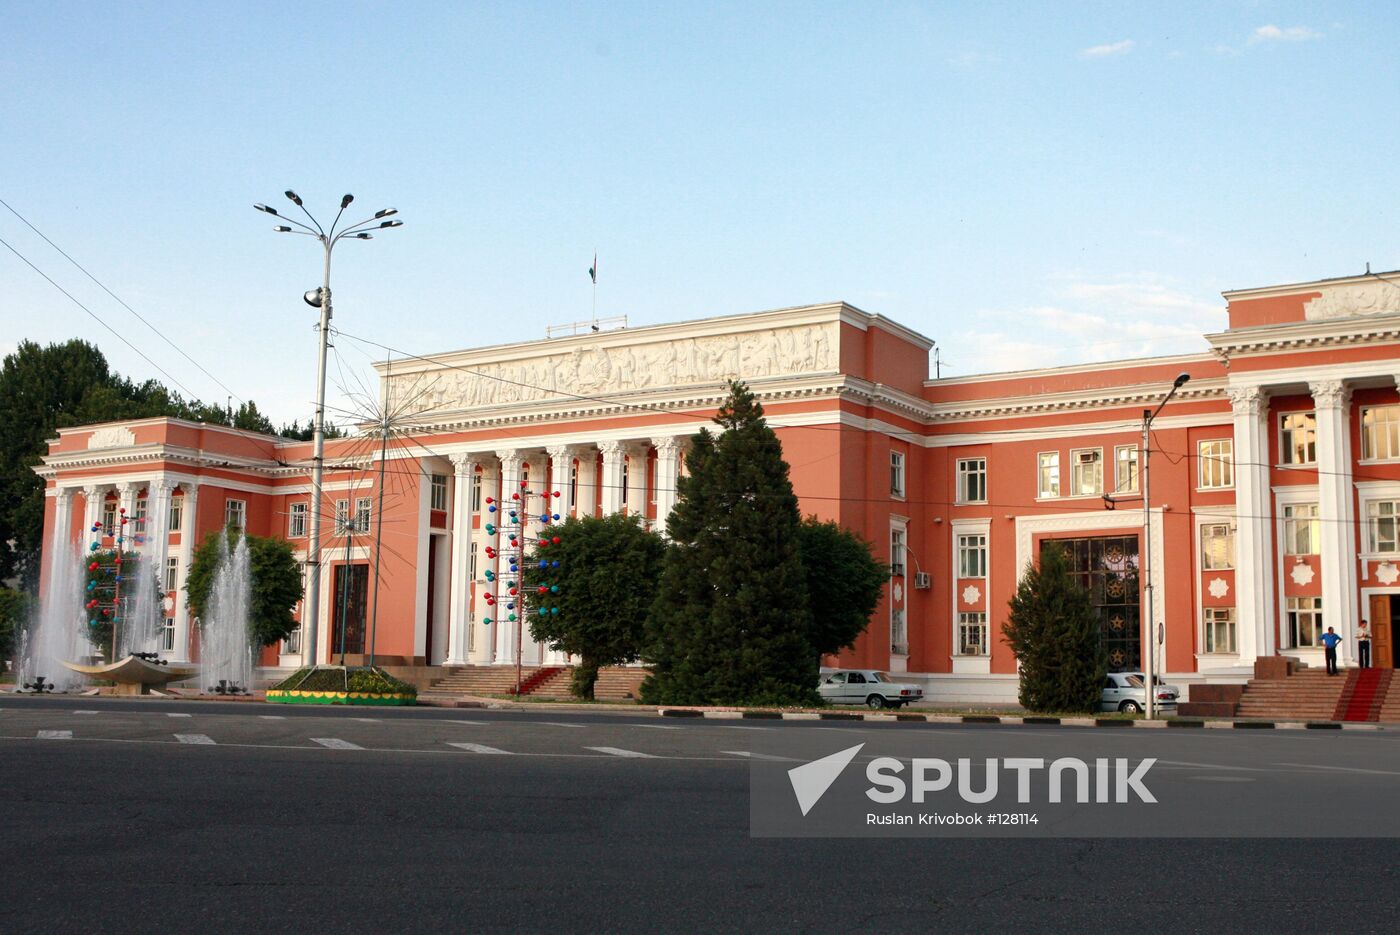 ADMINISTRATION BUILDING DUSHANBE